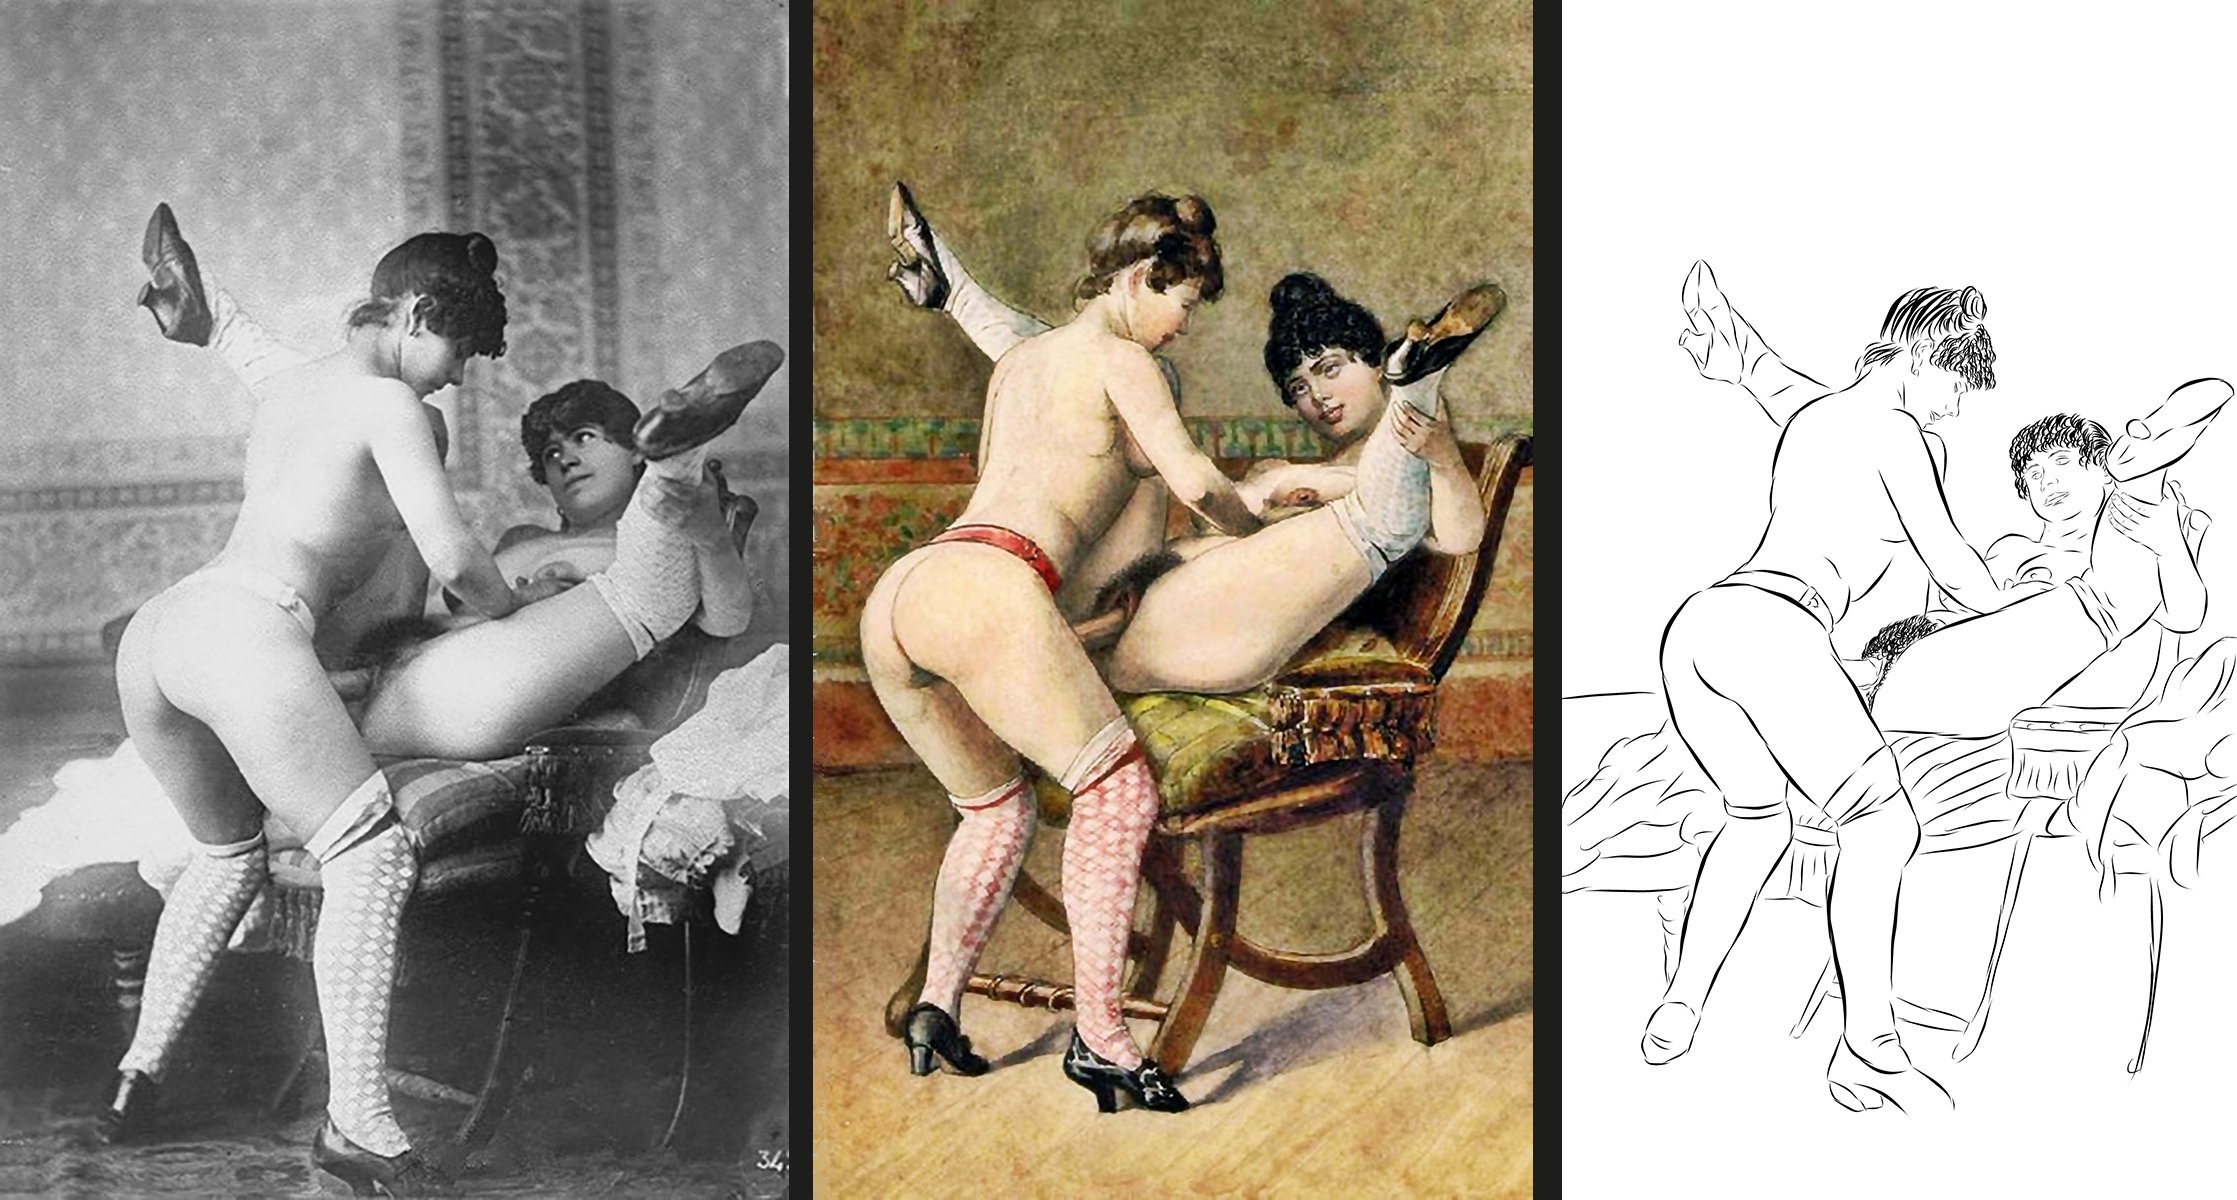 I found the source photo to a vintage porn painting (and made my own version of it...)